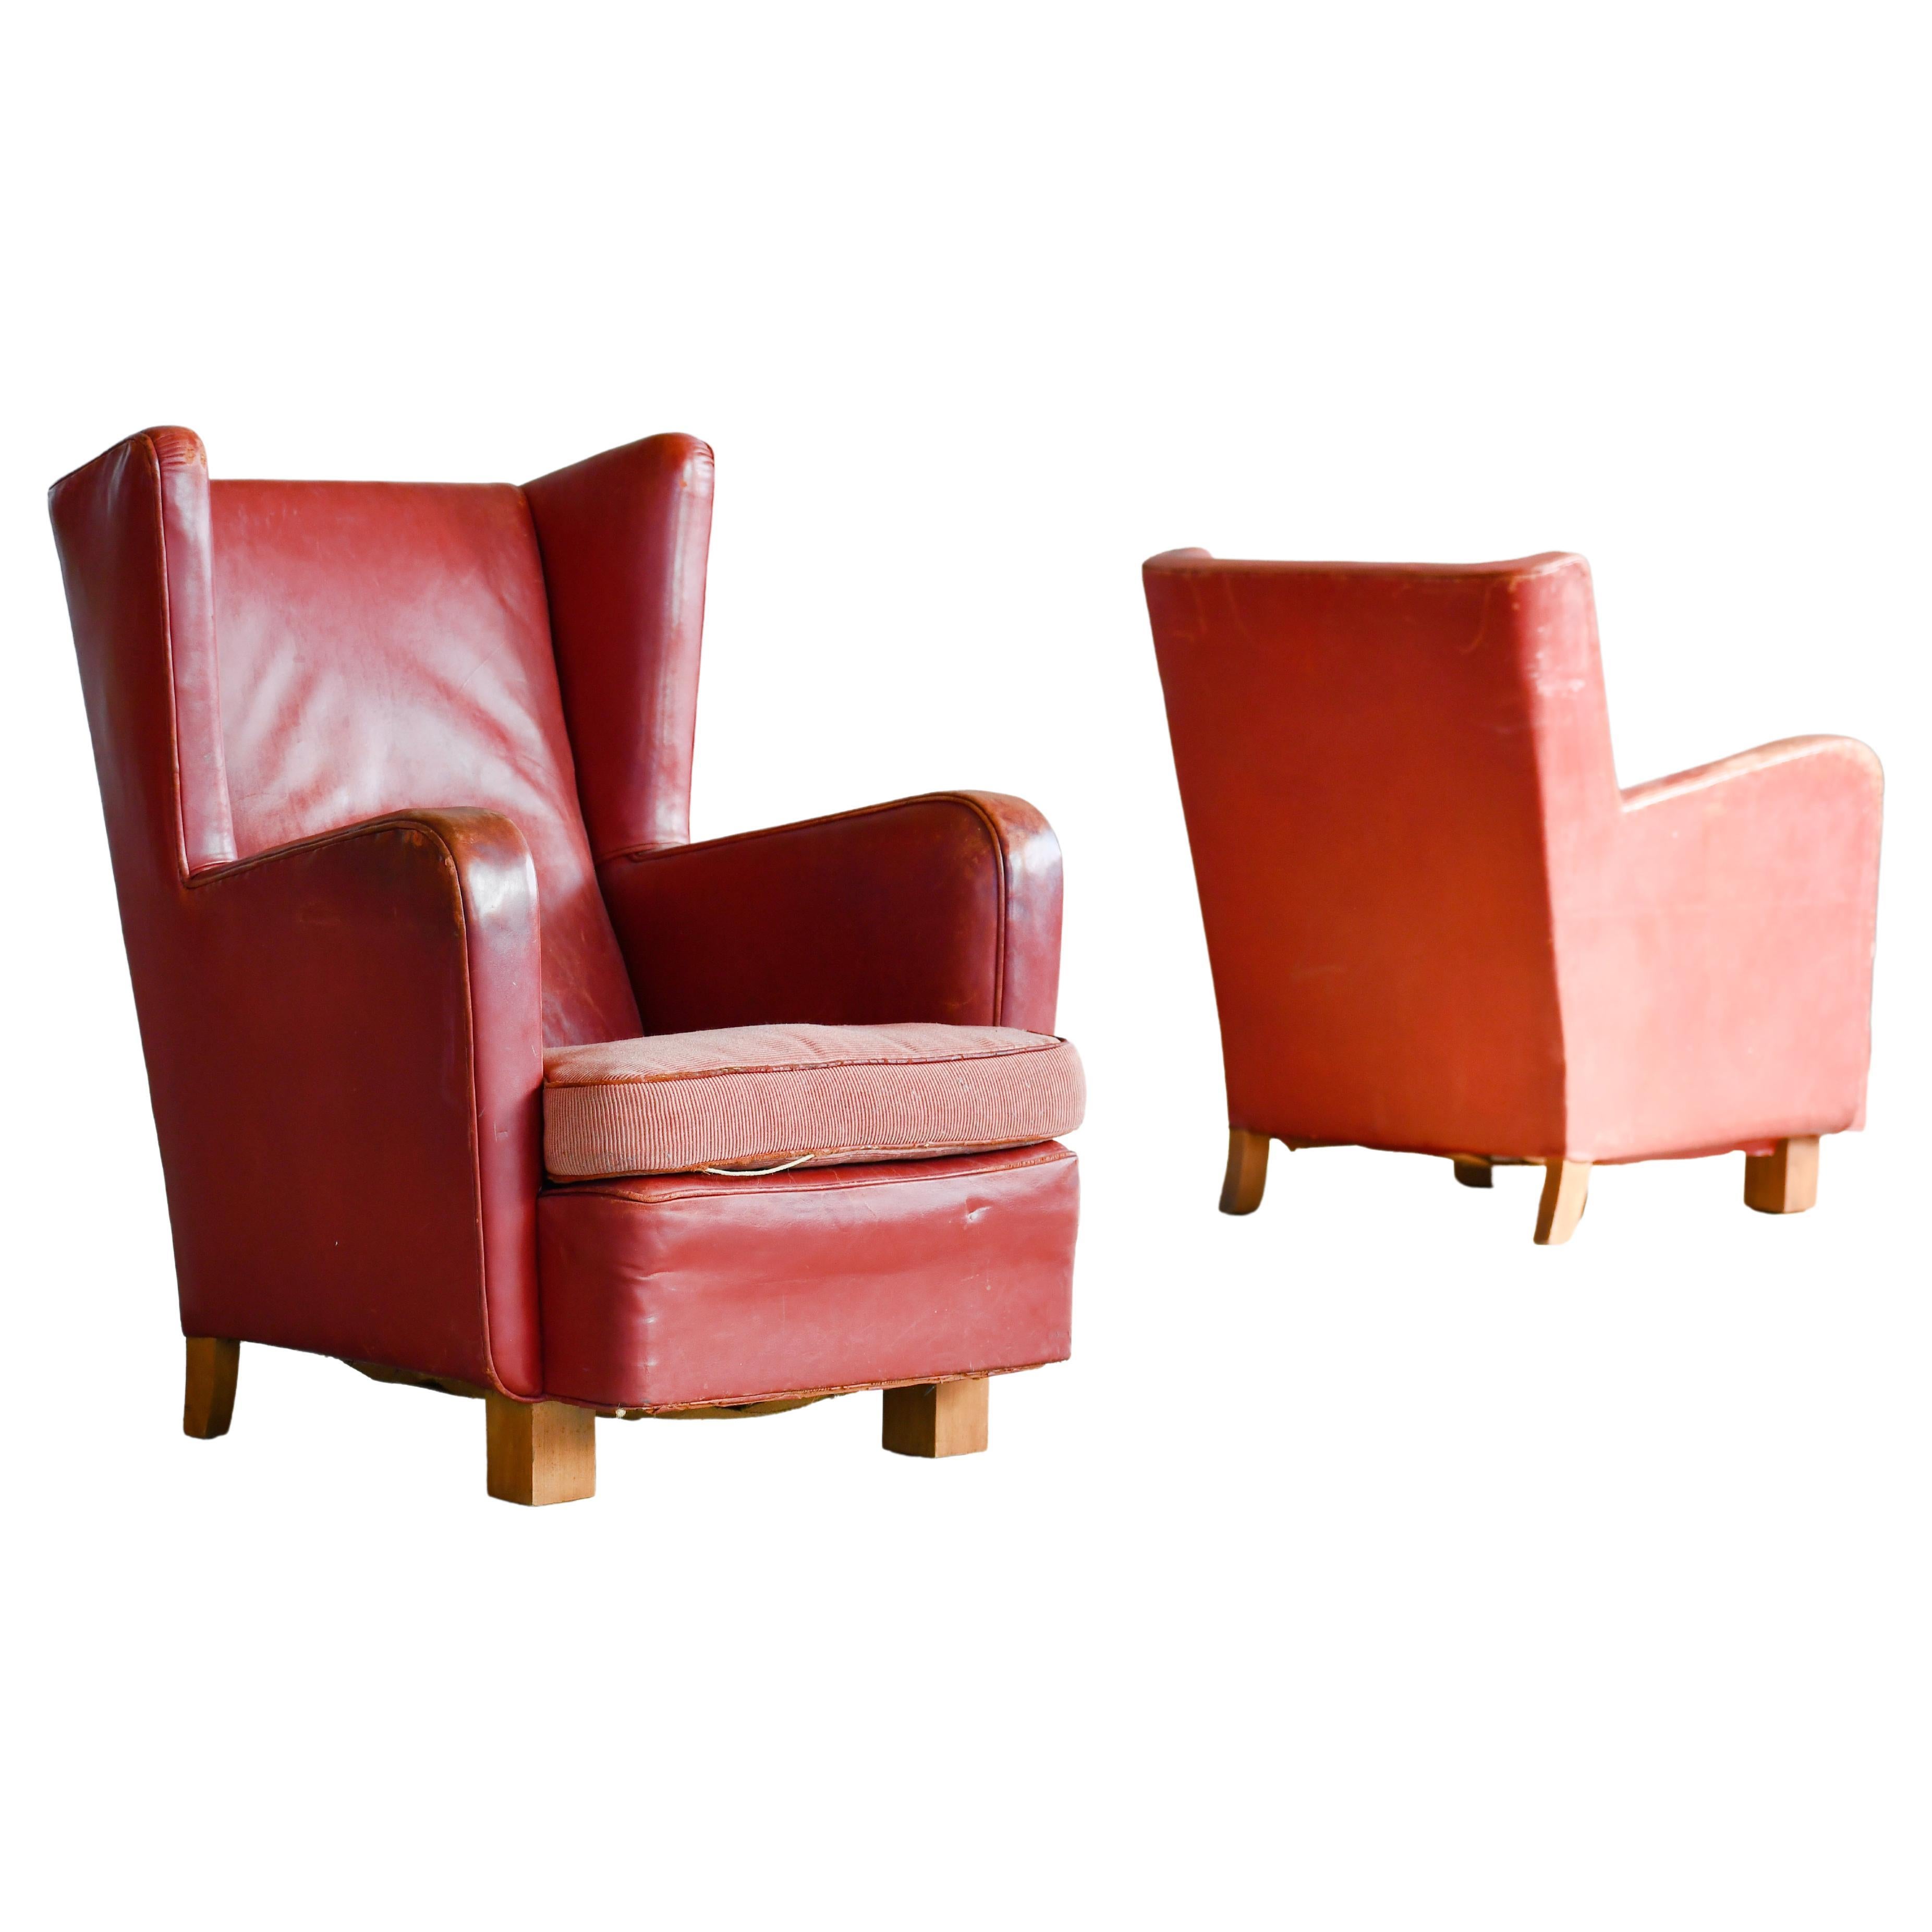 Danish 1940s Pair of Club Chairs in Reddish Leather  For Sale